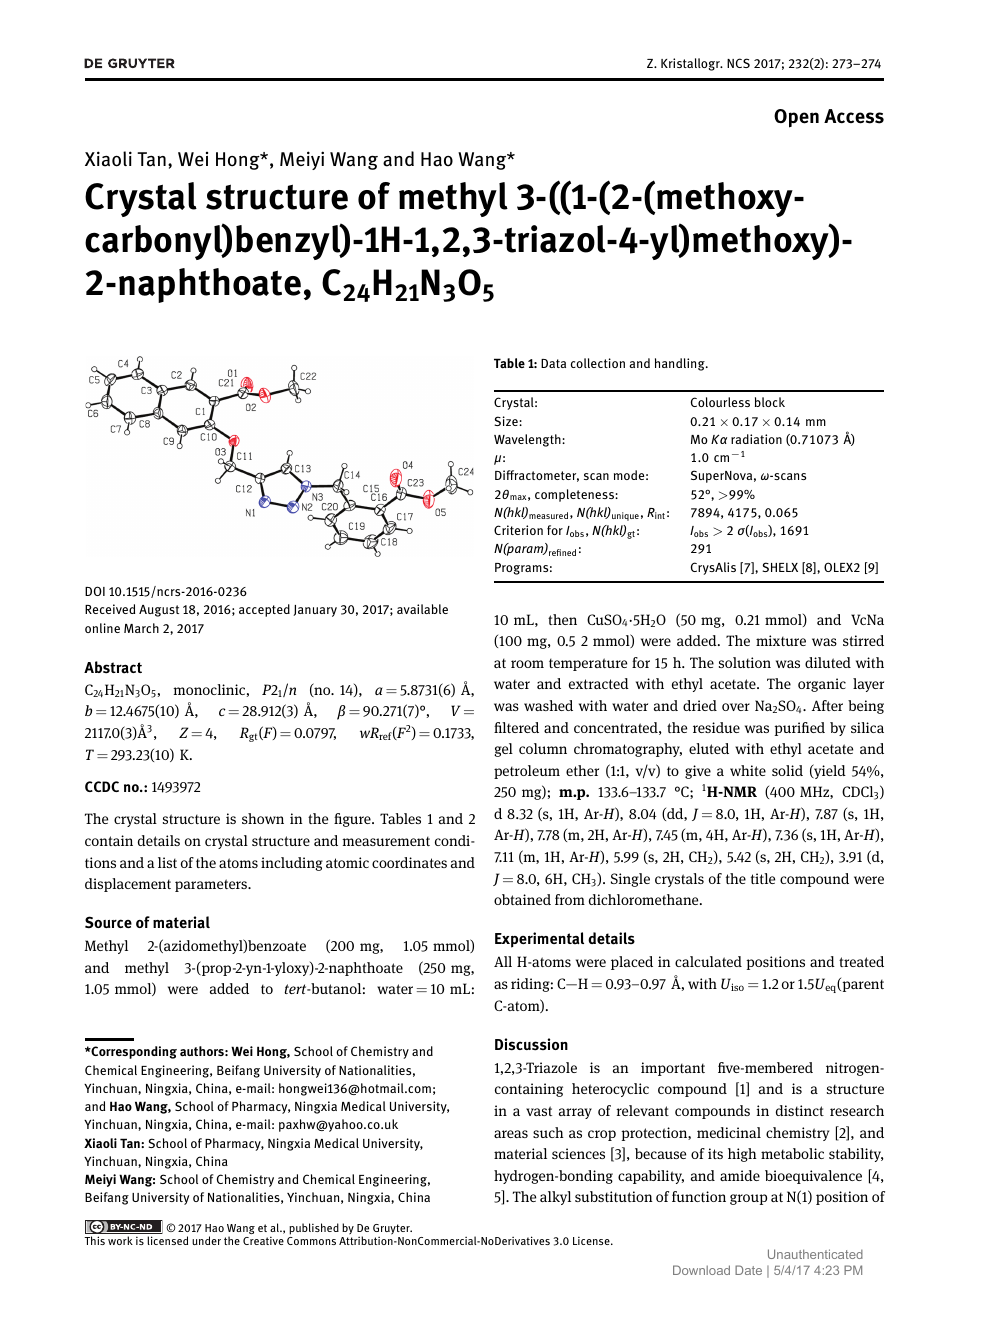 Crystal Structure Of Methyl 3 1 2 Methoxycarbonyl Benzyl 1h 1 2 3 Triazol 4 Yl Methoxy 2 Naphthoate C24h21n3o5 Topic Of Research Paper In Chemical Sciences Download Scholarly Article Pdf And Read For Free On Cyberleninka Open Science Hub